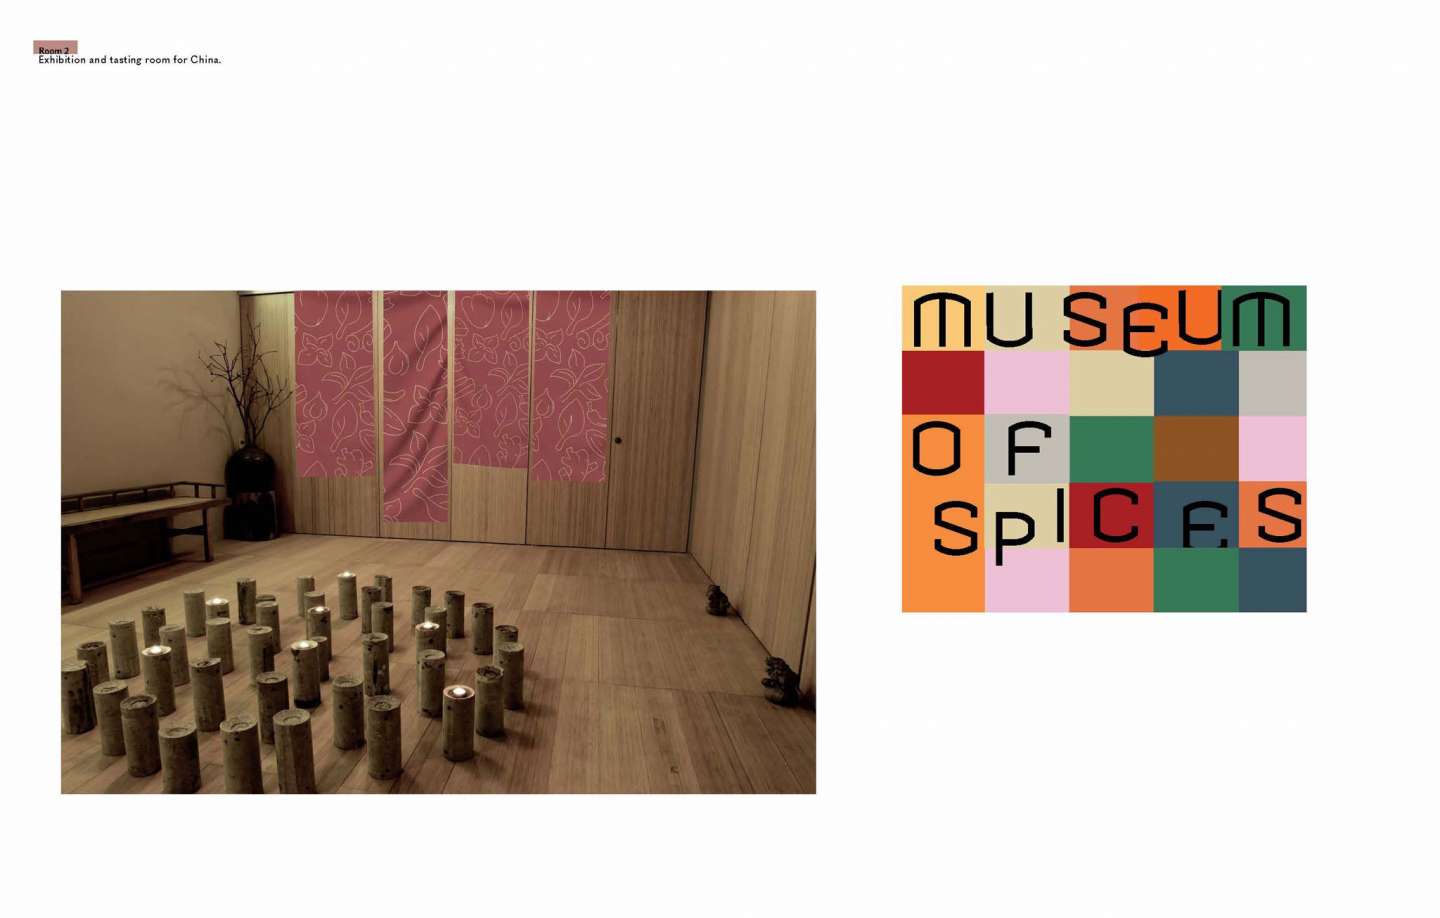 Museum of Spices 